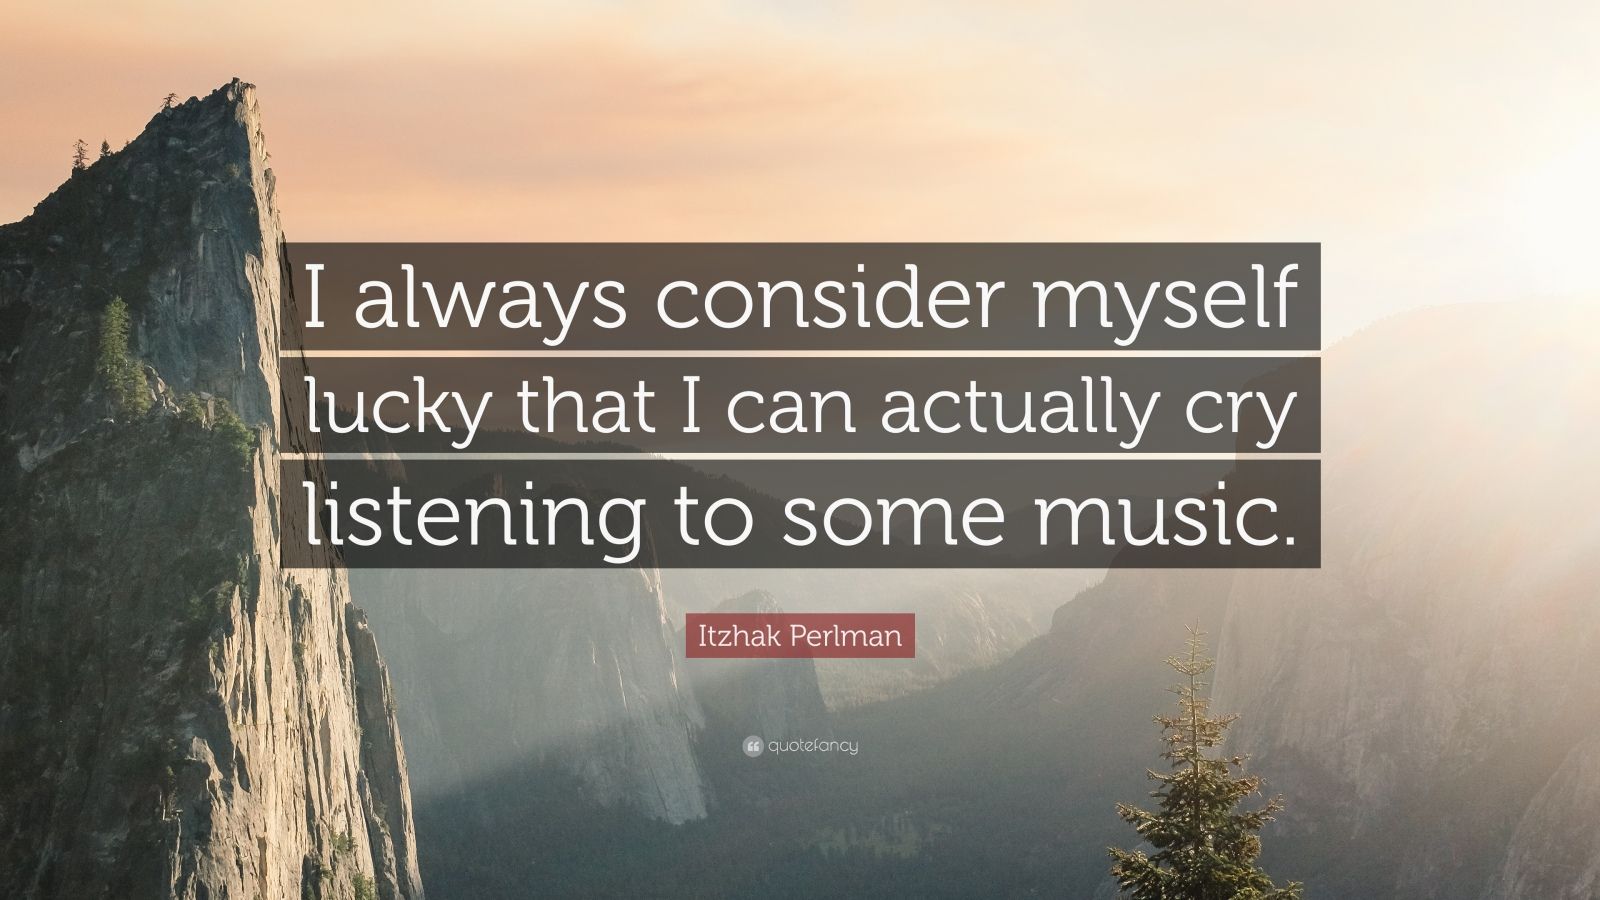 Top 50 Itzhak Perlman Quotes | 2021 Edition | Free Images - QuoteFancy